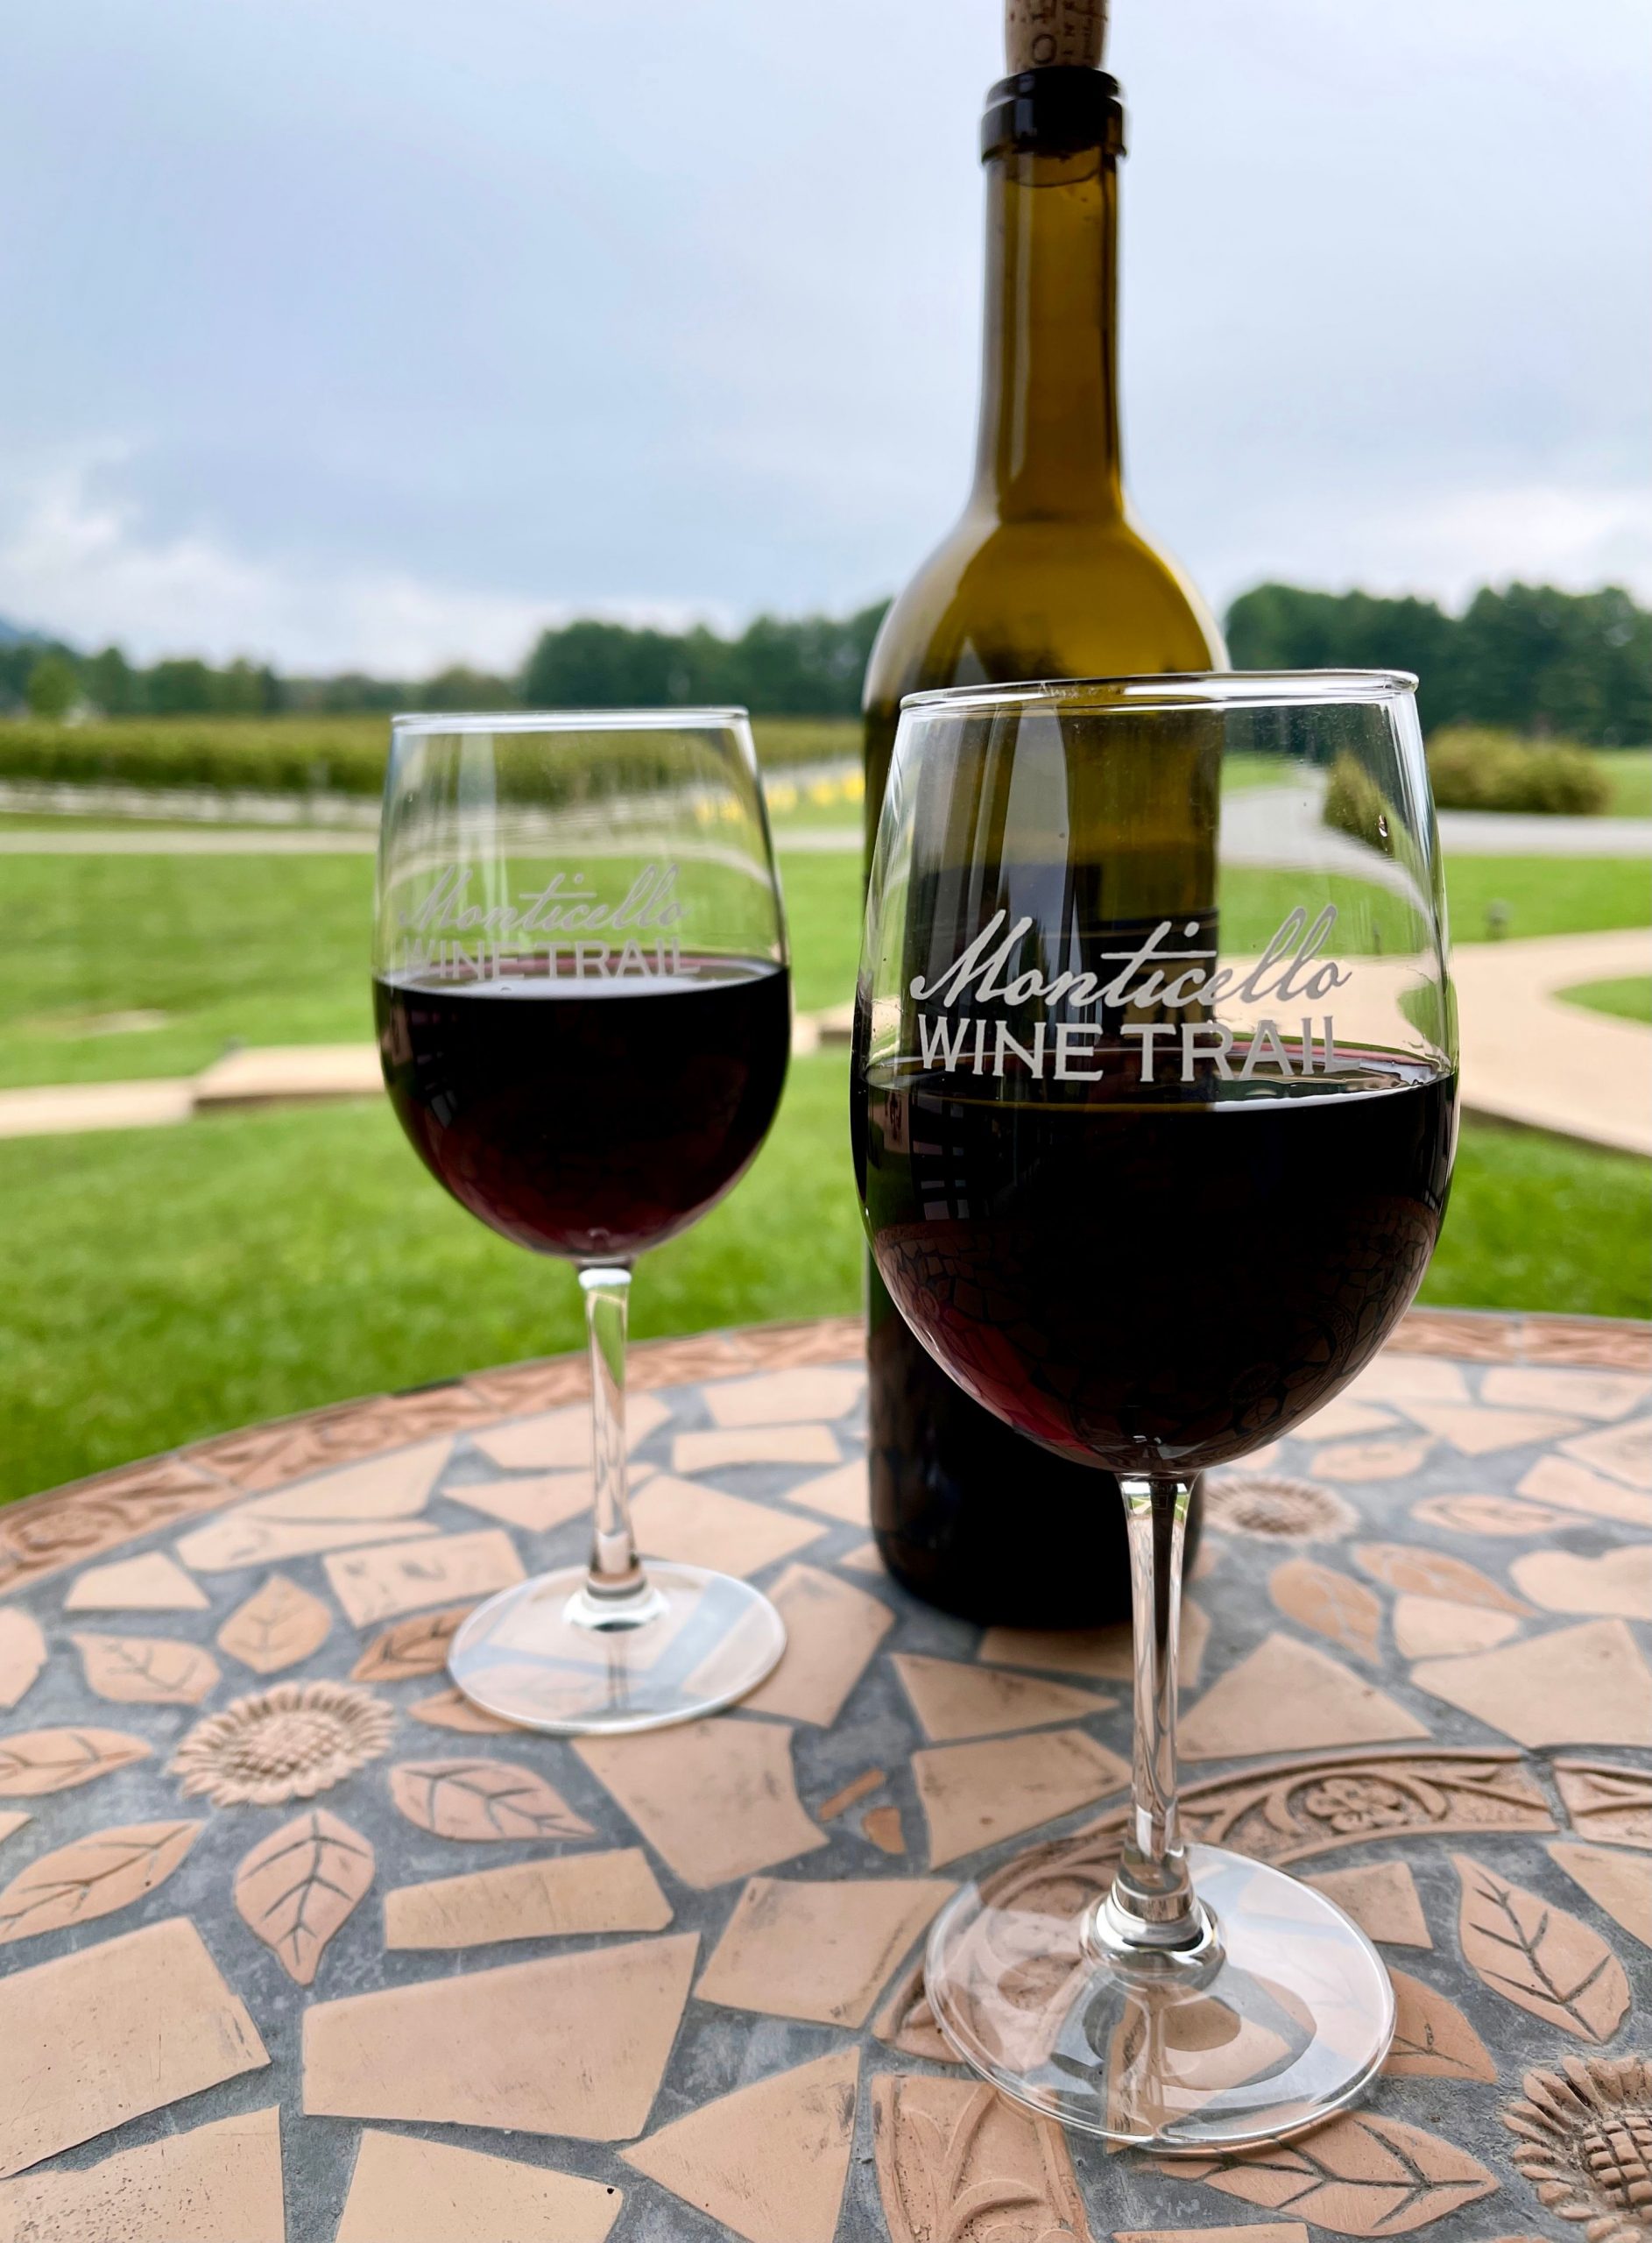 A visit to the Charlottesville area isn’t complete without a stop at one of the 40+ wineries on the Monticello Wine Trail.